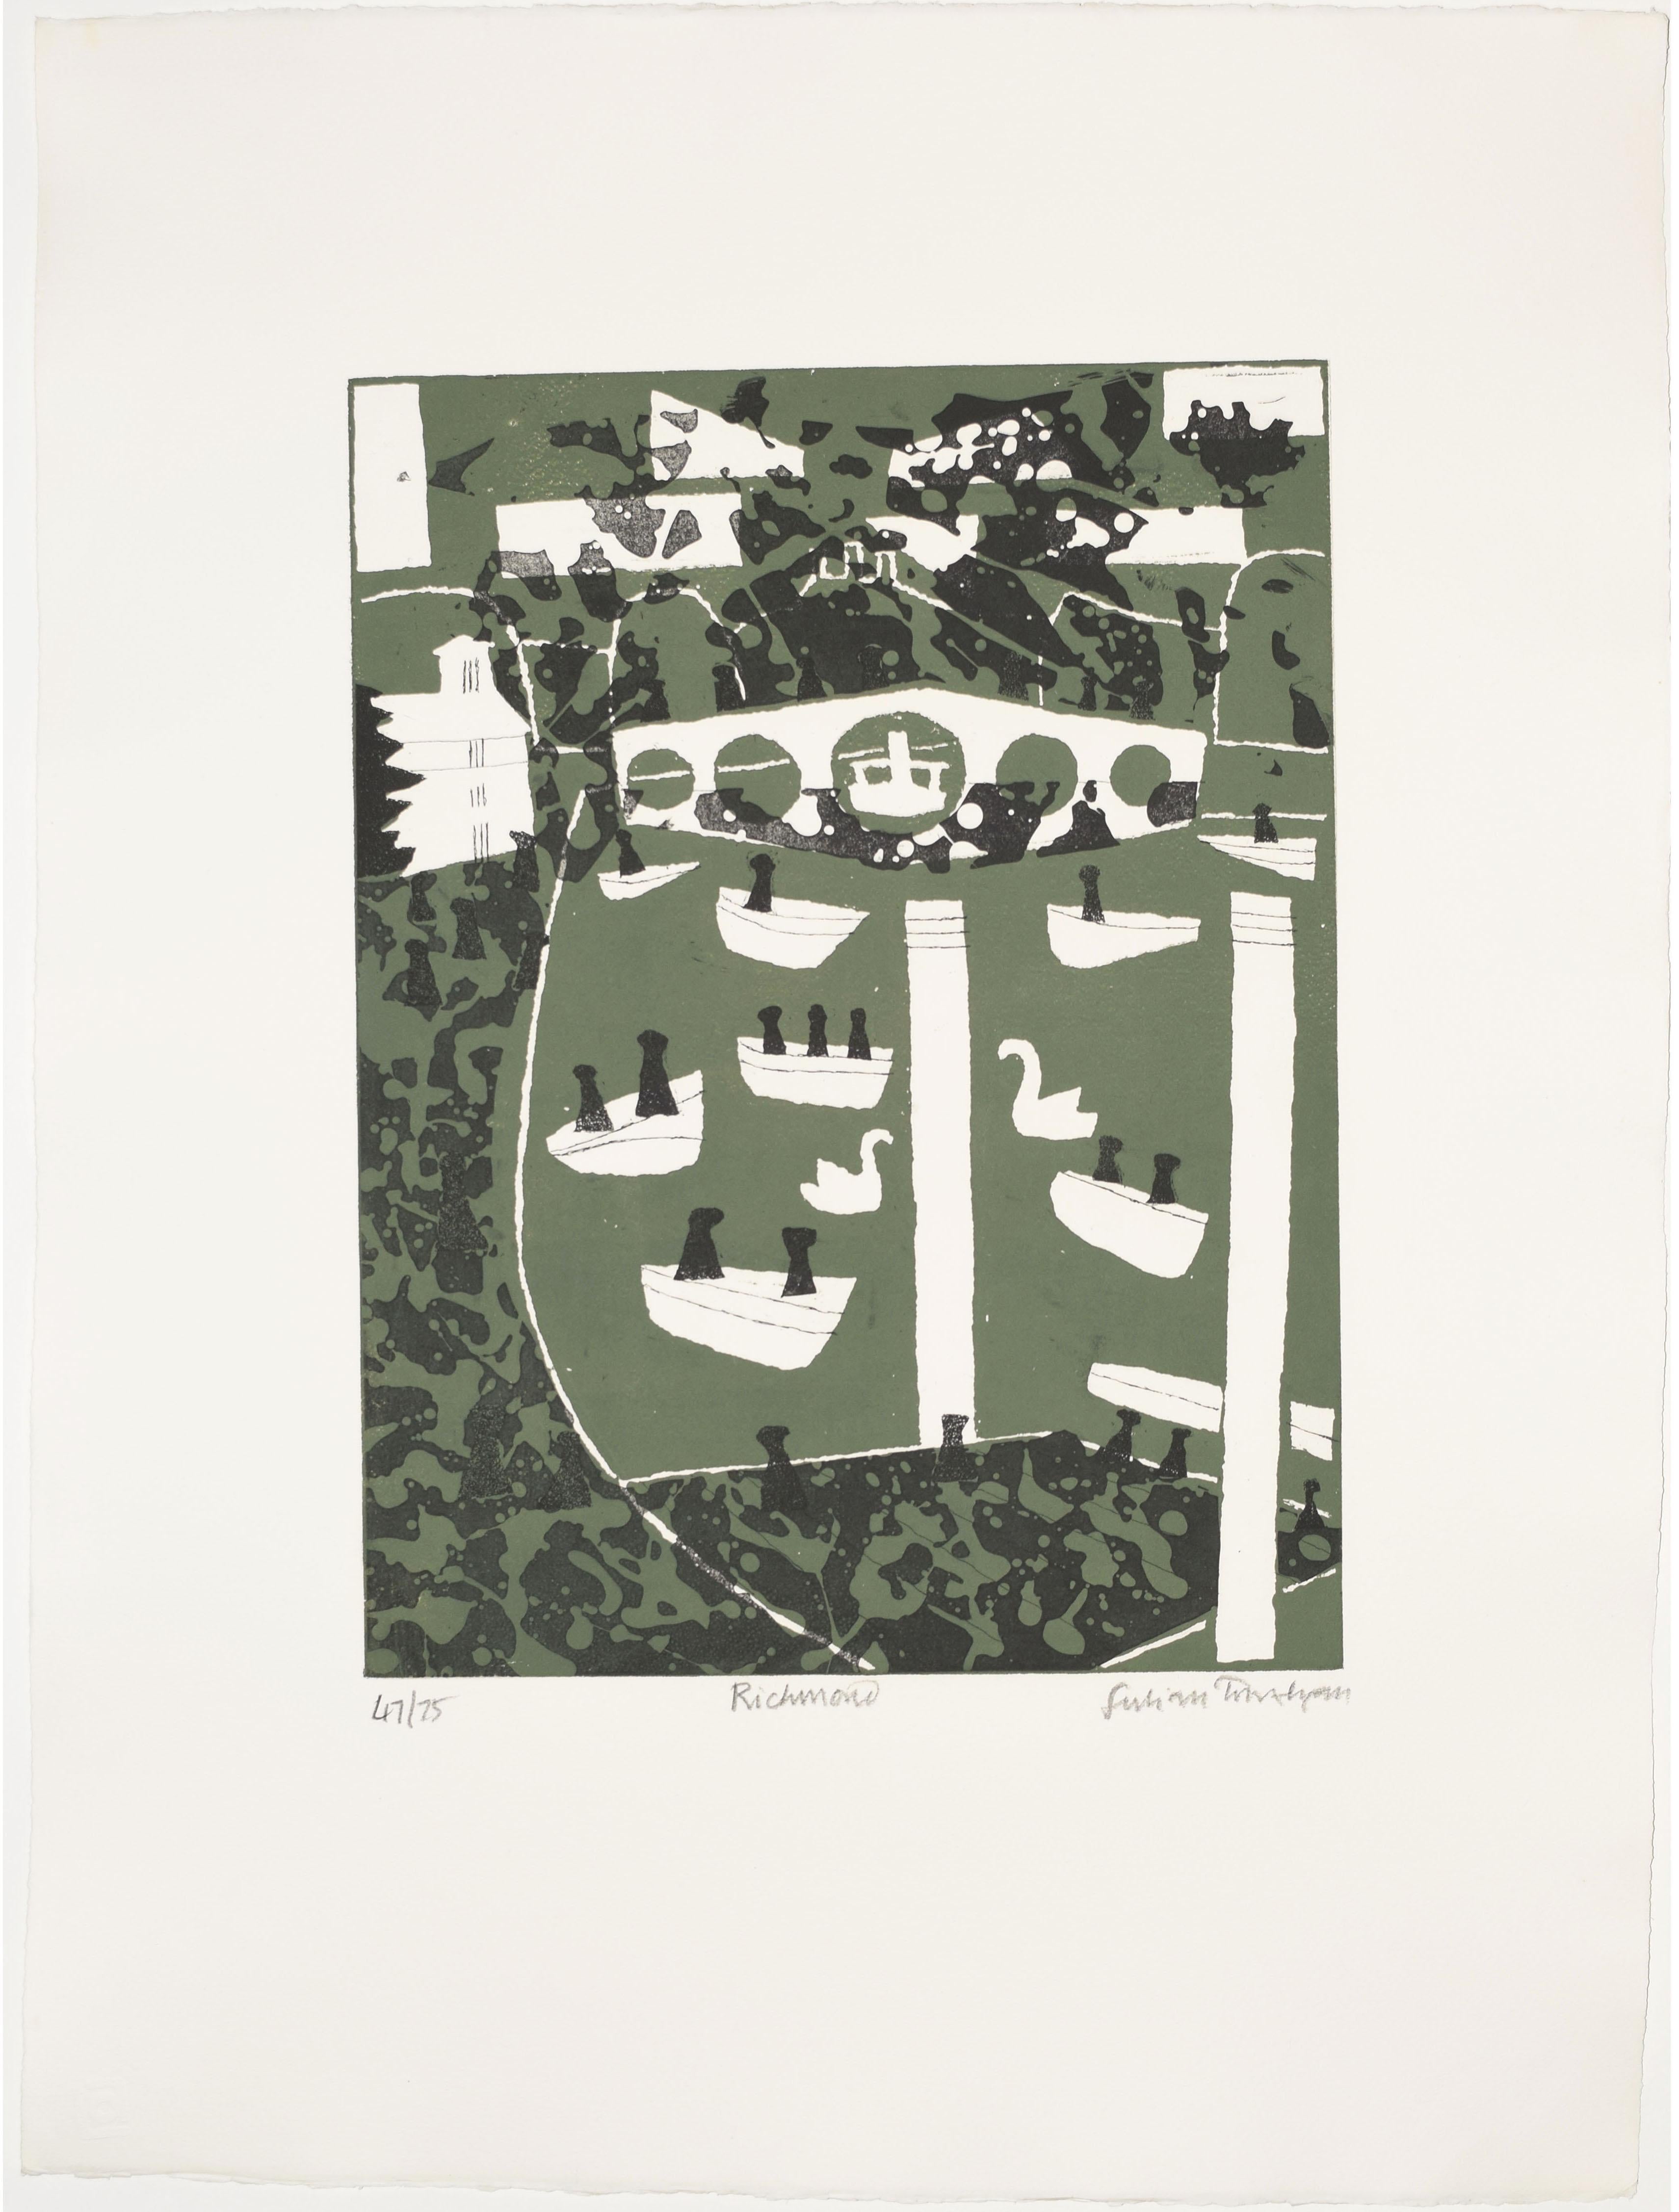 Julian Trevelyan (1910-1988)
Richmond (1969)
Etching and aquatint, signed, numbered 48/75
48x35cm

Nephew of the historian G M Trevelyan he was educated at Bedales and Trinity College, Cambridge, reading English. Moving to Paris and becoming an